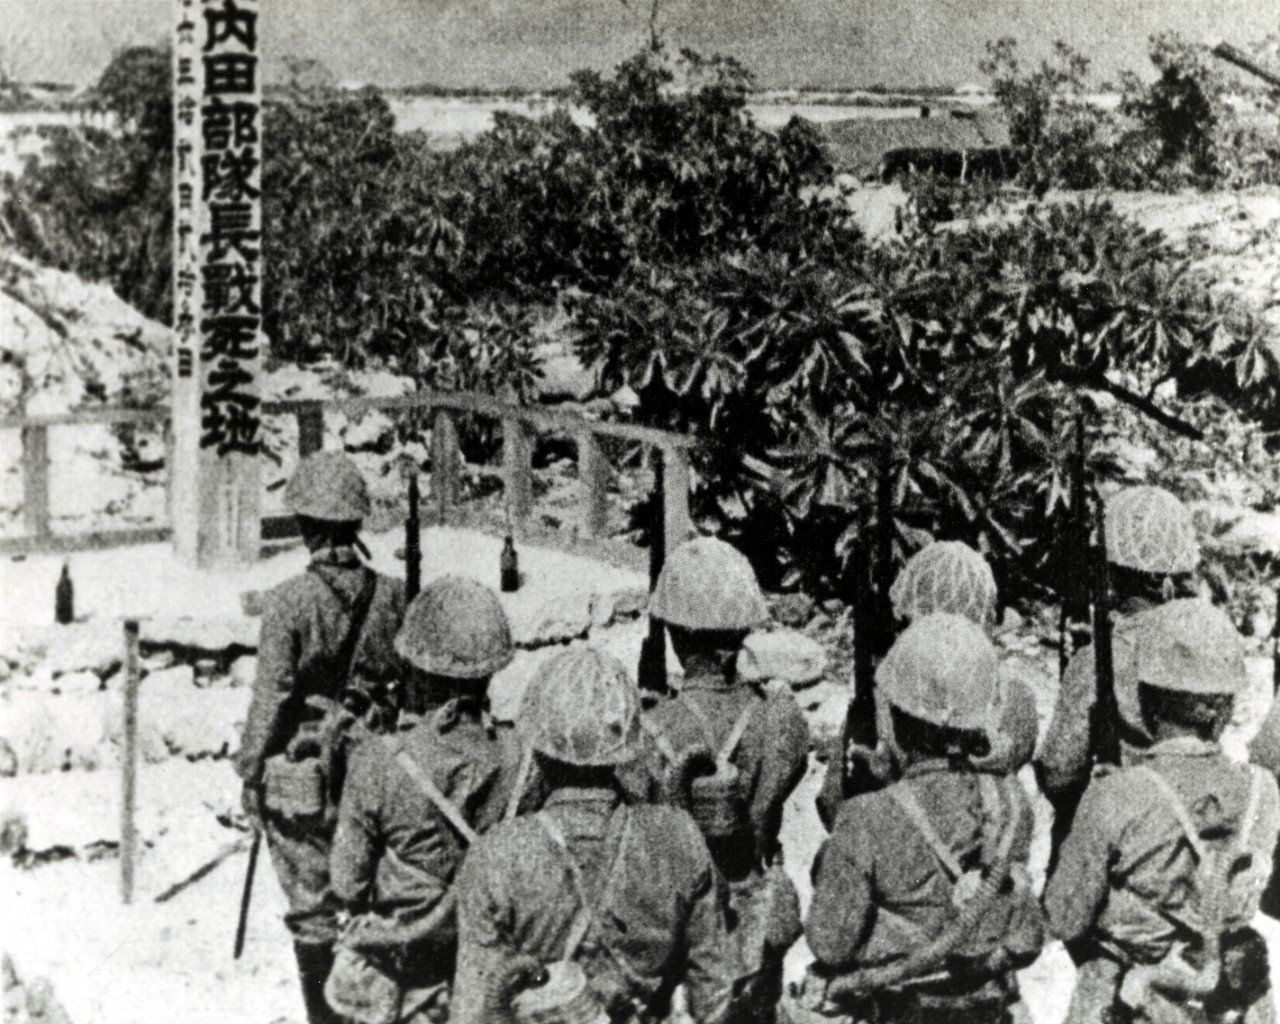 USMC 315175:  Wake Island, December 23, 1941.  Japanese troops pay homage to a memorial erected to unit commander Uchida, who was killed in the landing on Wake Island, 23 December 1941.  Copied from a Japanese picture book. U.S. Marine Corps photograph.